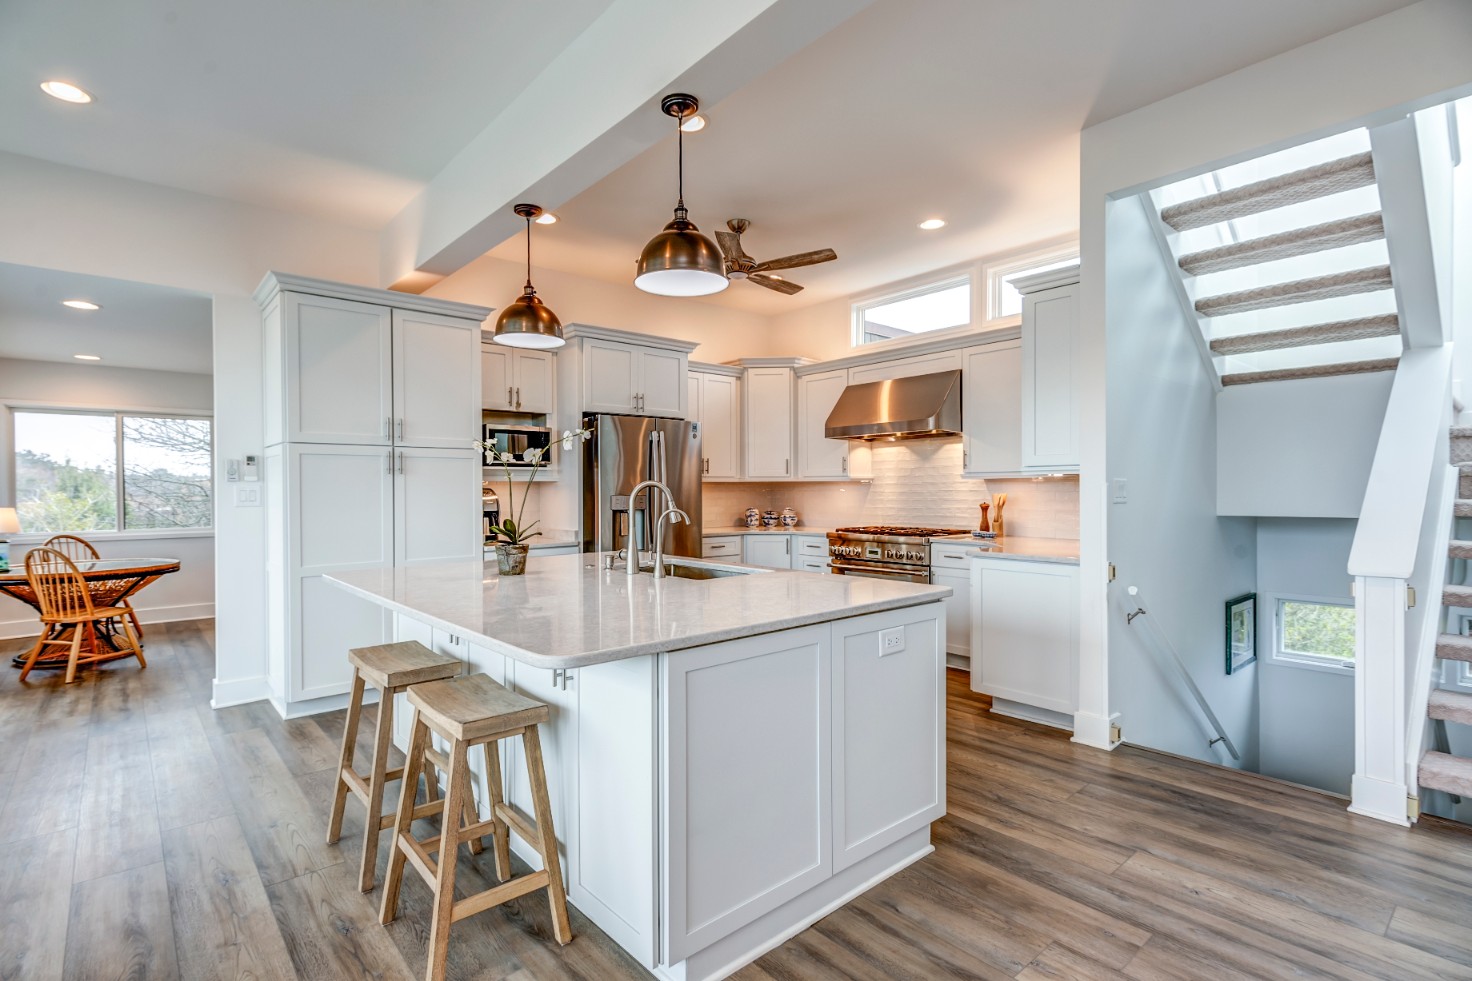 Cotton Patch Hills Renovation in Bethany Beach DE - Kitchen Island with Two Wooden Stools and Undermount Sink